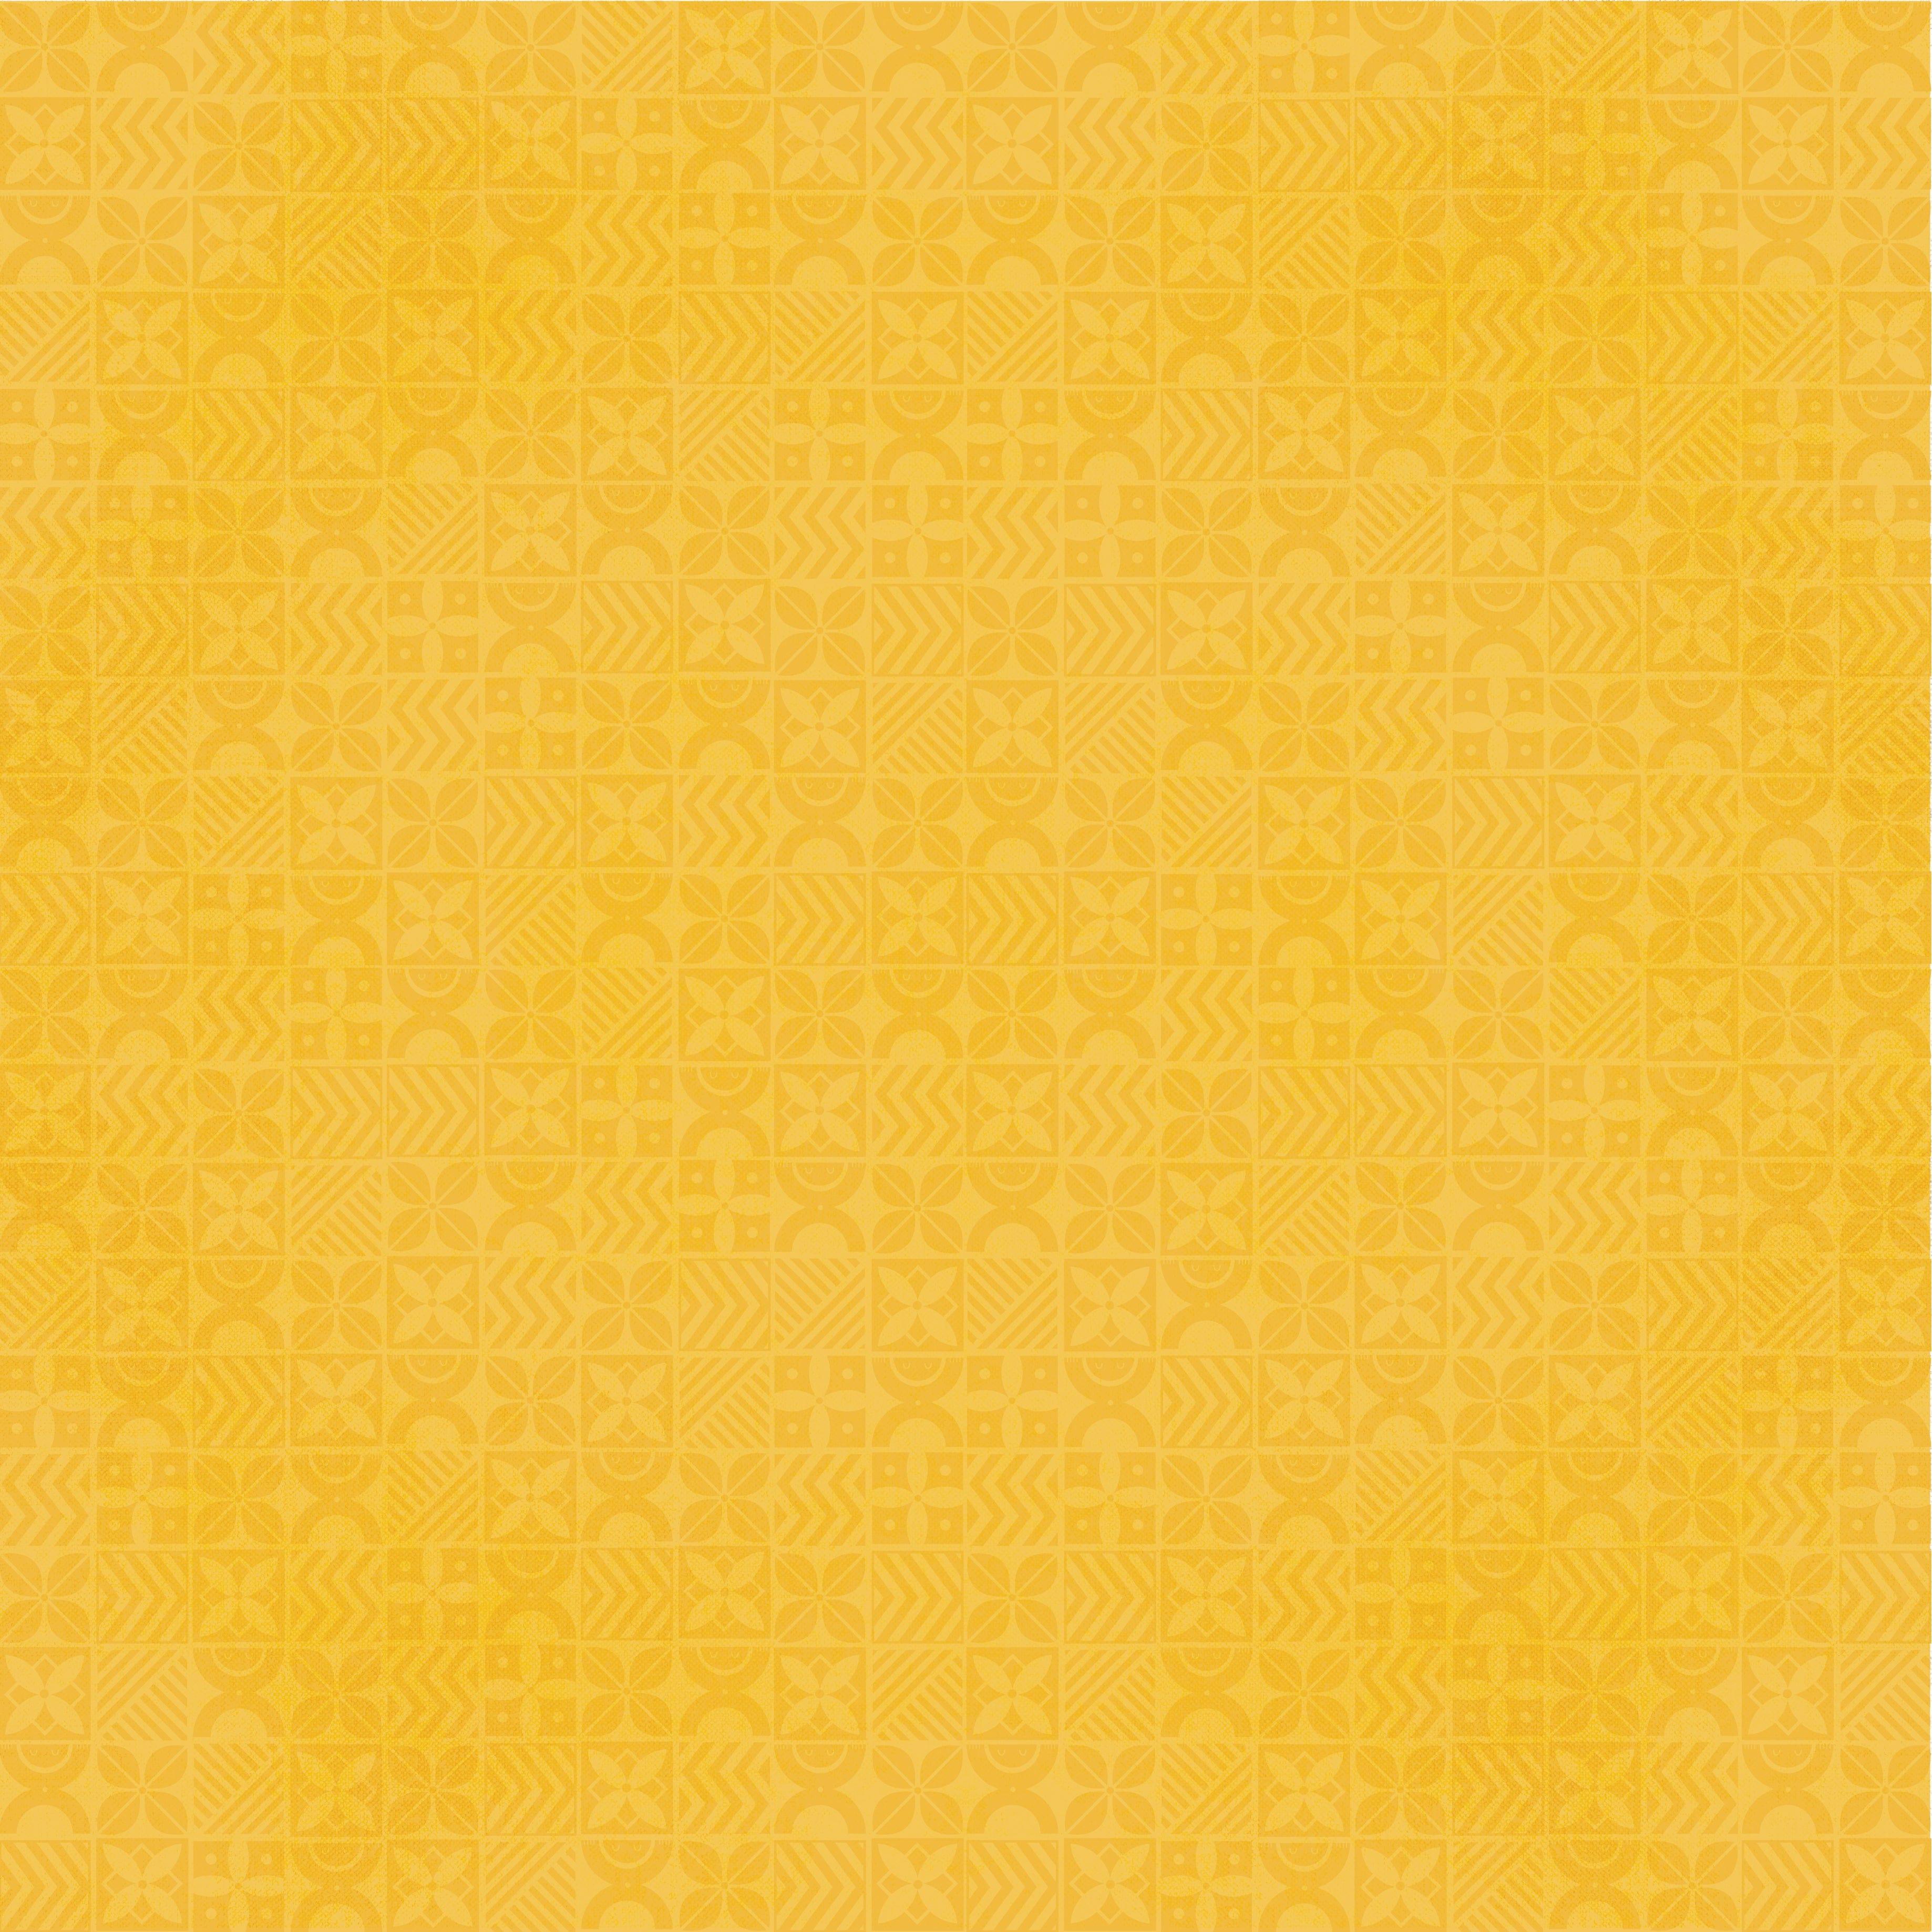 Say Cheese Adventure At The Park Collection Sunshine In A Cup 12 x 12 Double-Sided Scrapbook Paper by Simple Stories - Scrapbook Supply Companies